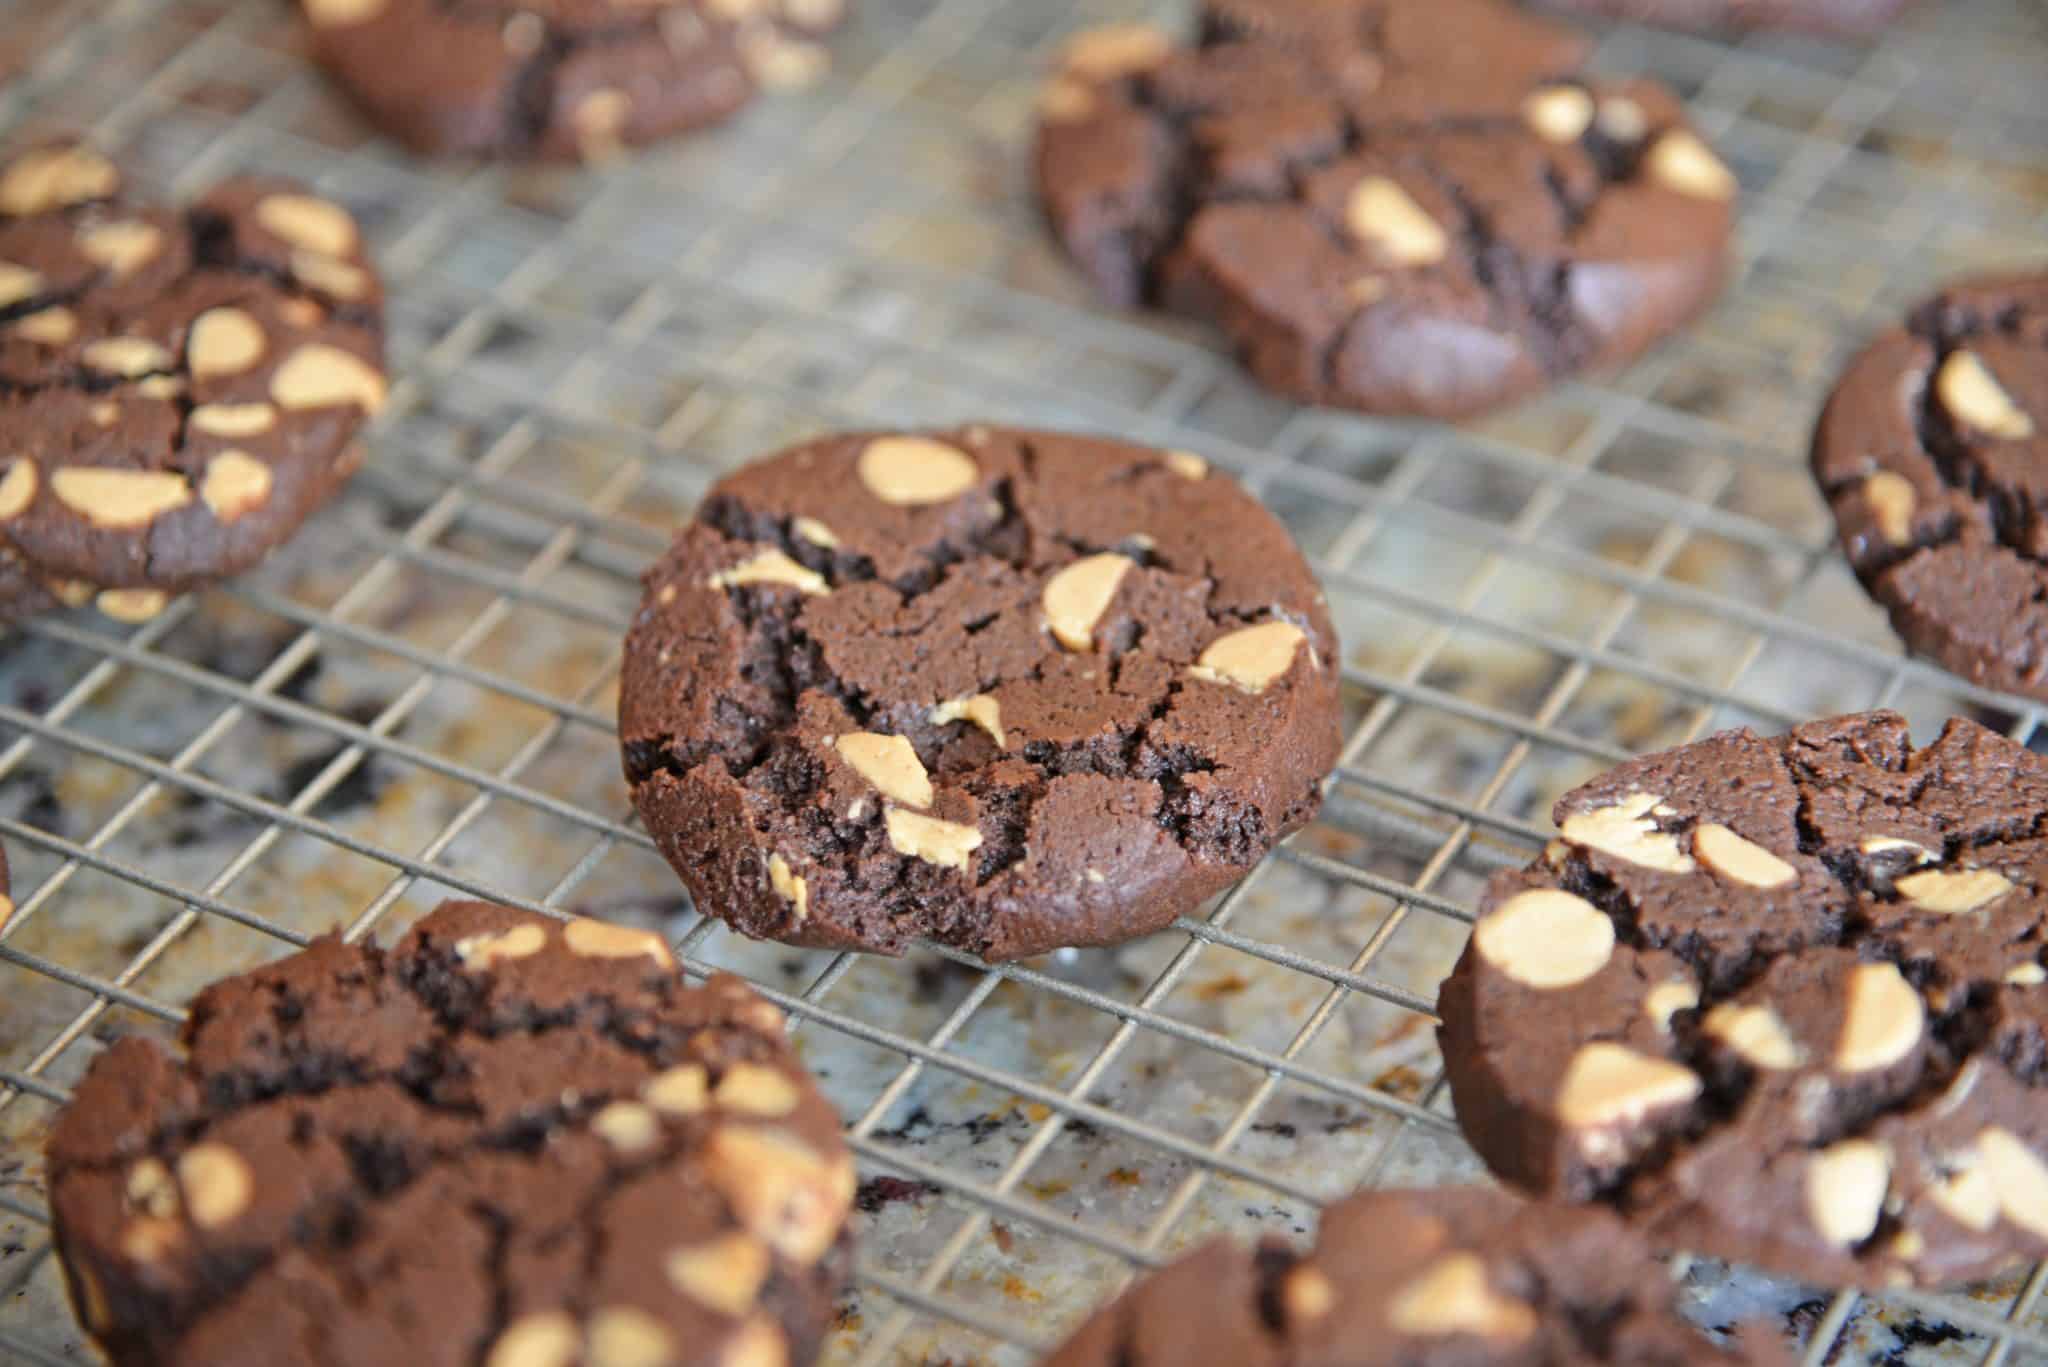 These Chocolate Peanut Butter Cookie Sandwiches are quite possibly the best cookie sandwich you will ever eat. Highly addictive: bake with caution! #chocolatepeanutbuttersandwichcookies #sandwichcookies #peanutbutter www.savoryexperiments.com